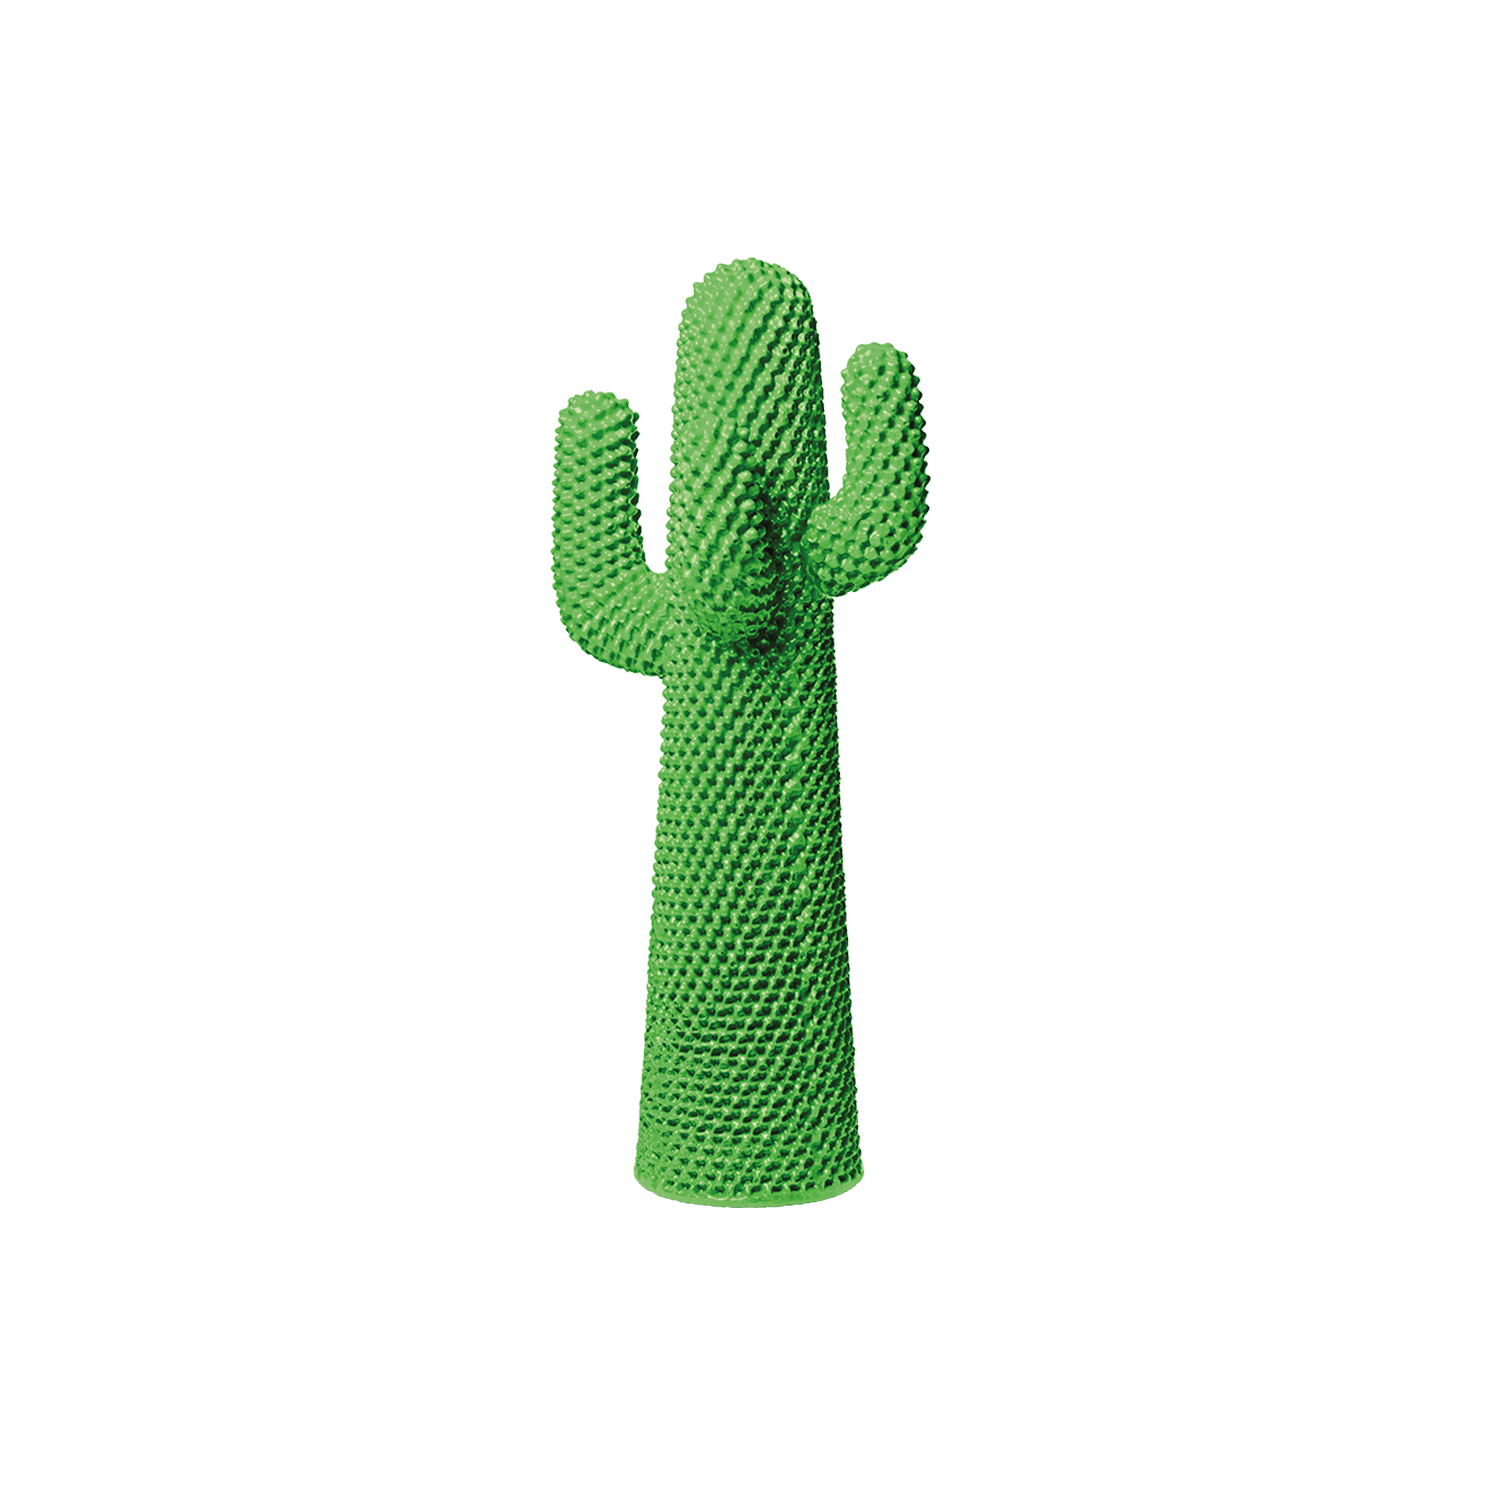 Another Green Cactus®